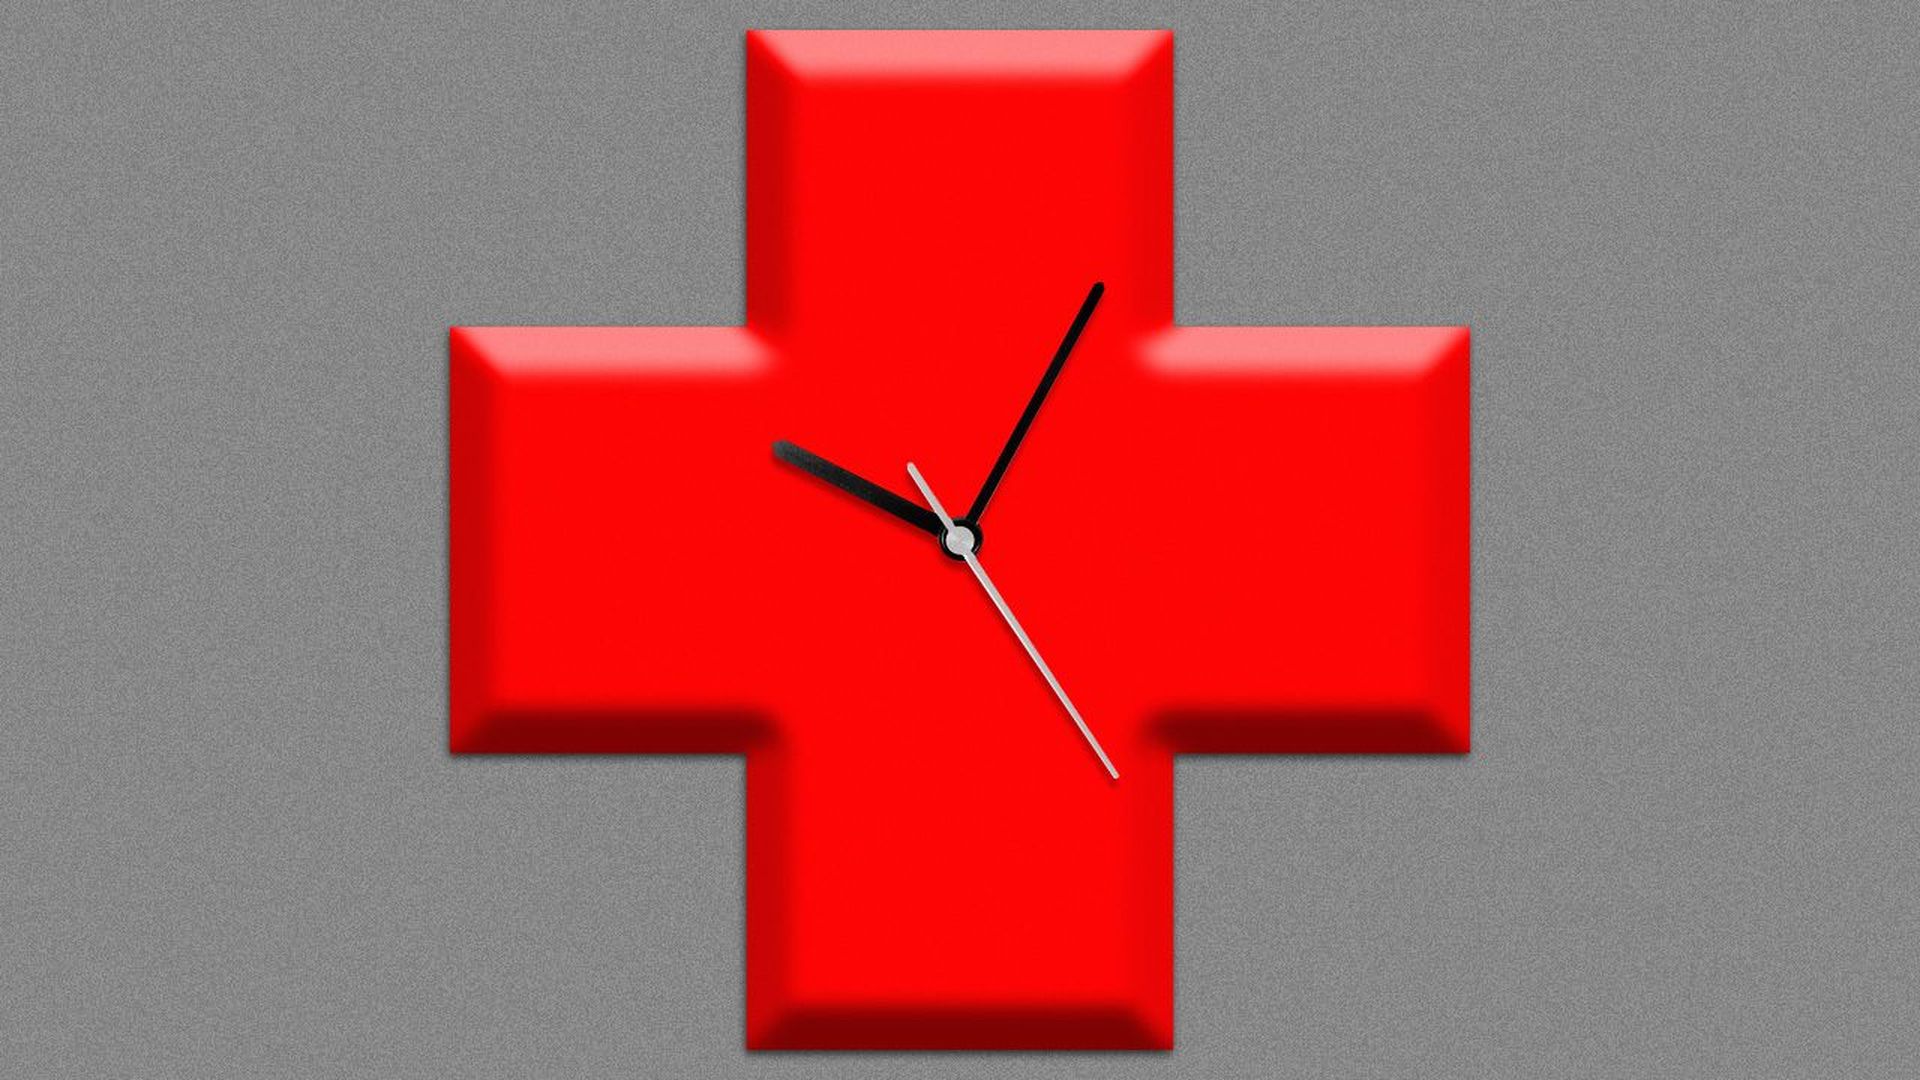 Illustration of a medical cross with clock hands 